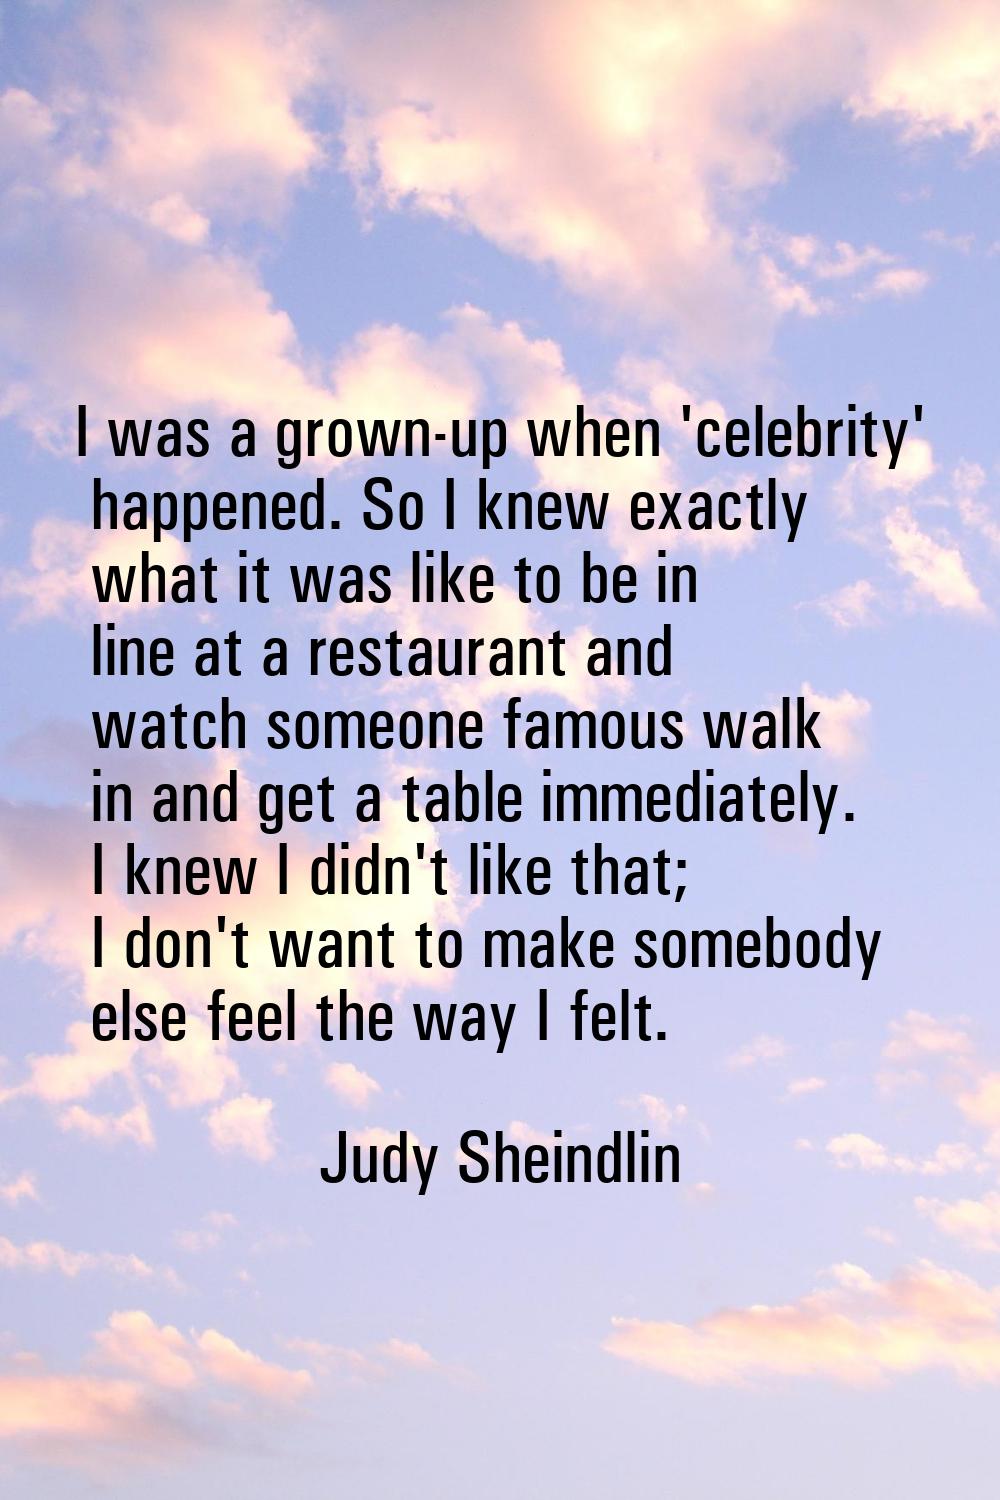 I was a grown-up when 'celebrity' happened. So I knew exactly what it was like to be in line at a r